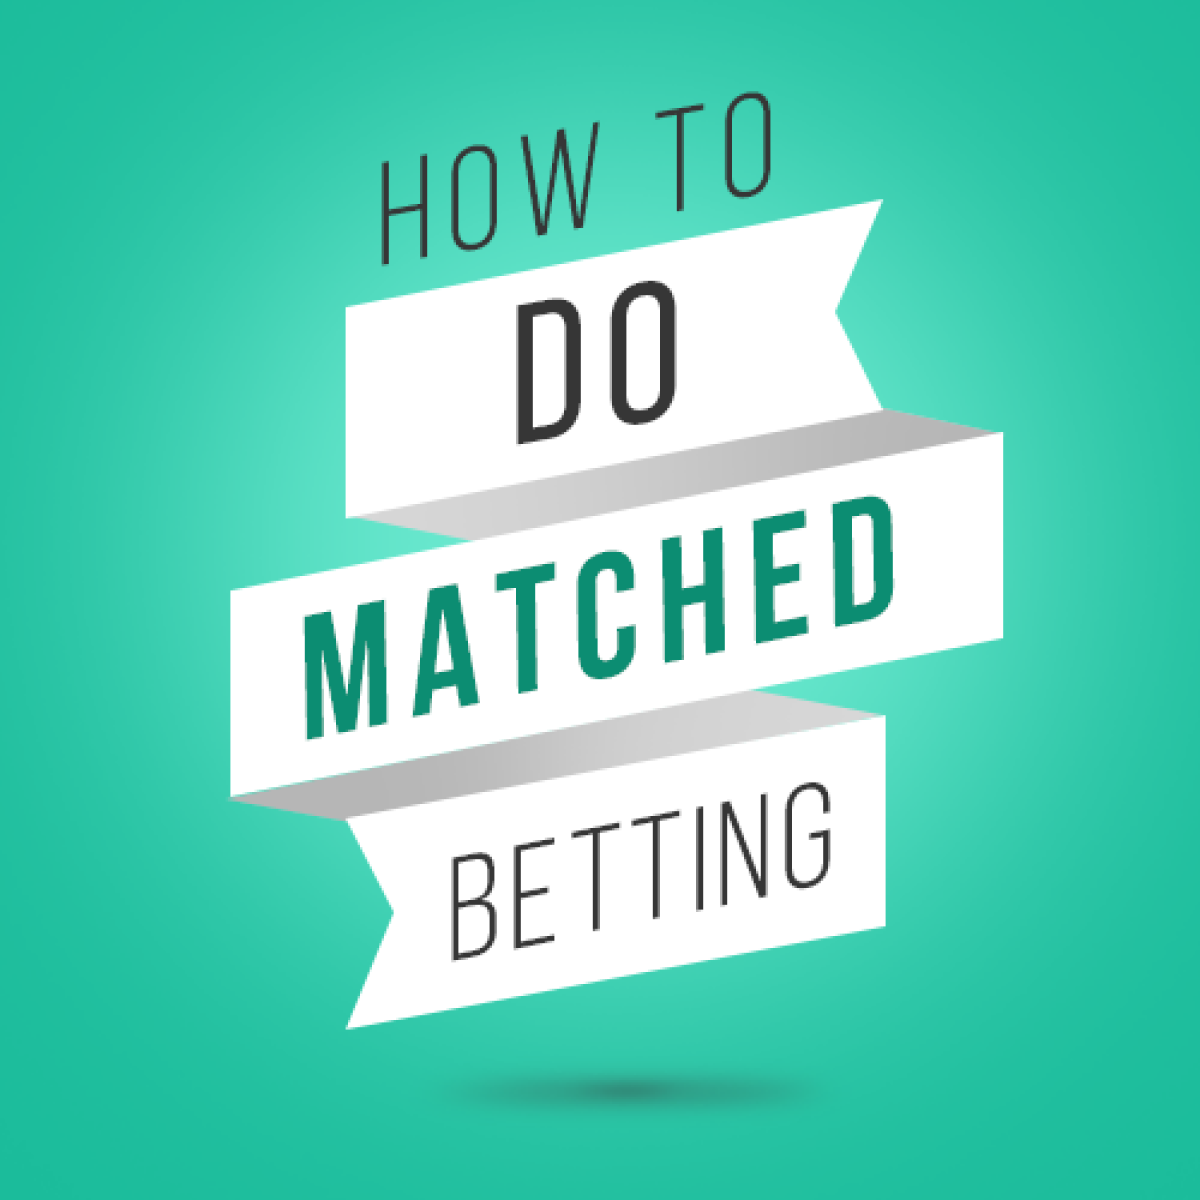 Matched betting matches